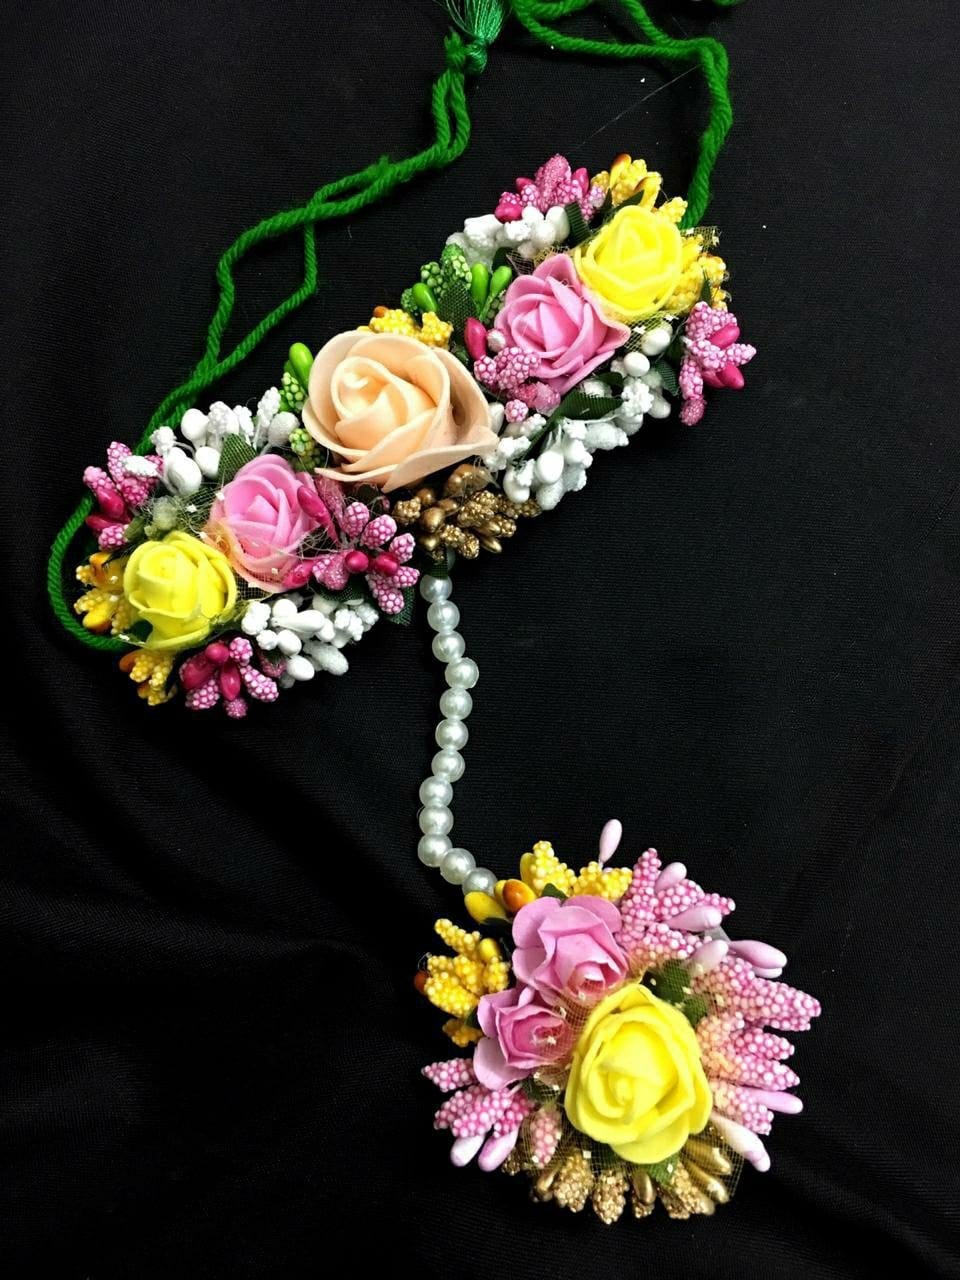 LAMANSH Floral 🌺 Giveaways Yellow - Pink - Peach / 5 Pair Floral Hathphool LAMANSH Multicolored Flower 🌺 Bracelets Attached to Ring ( Set of 5 Pair)